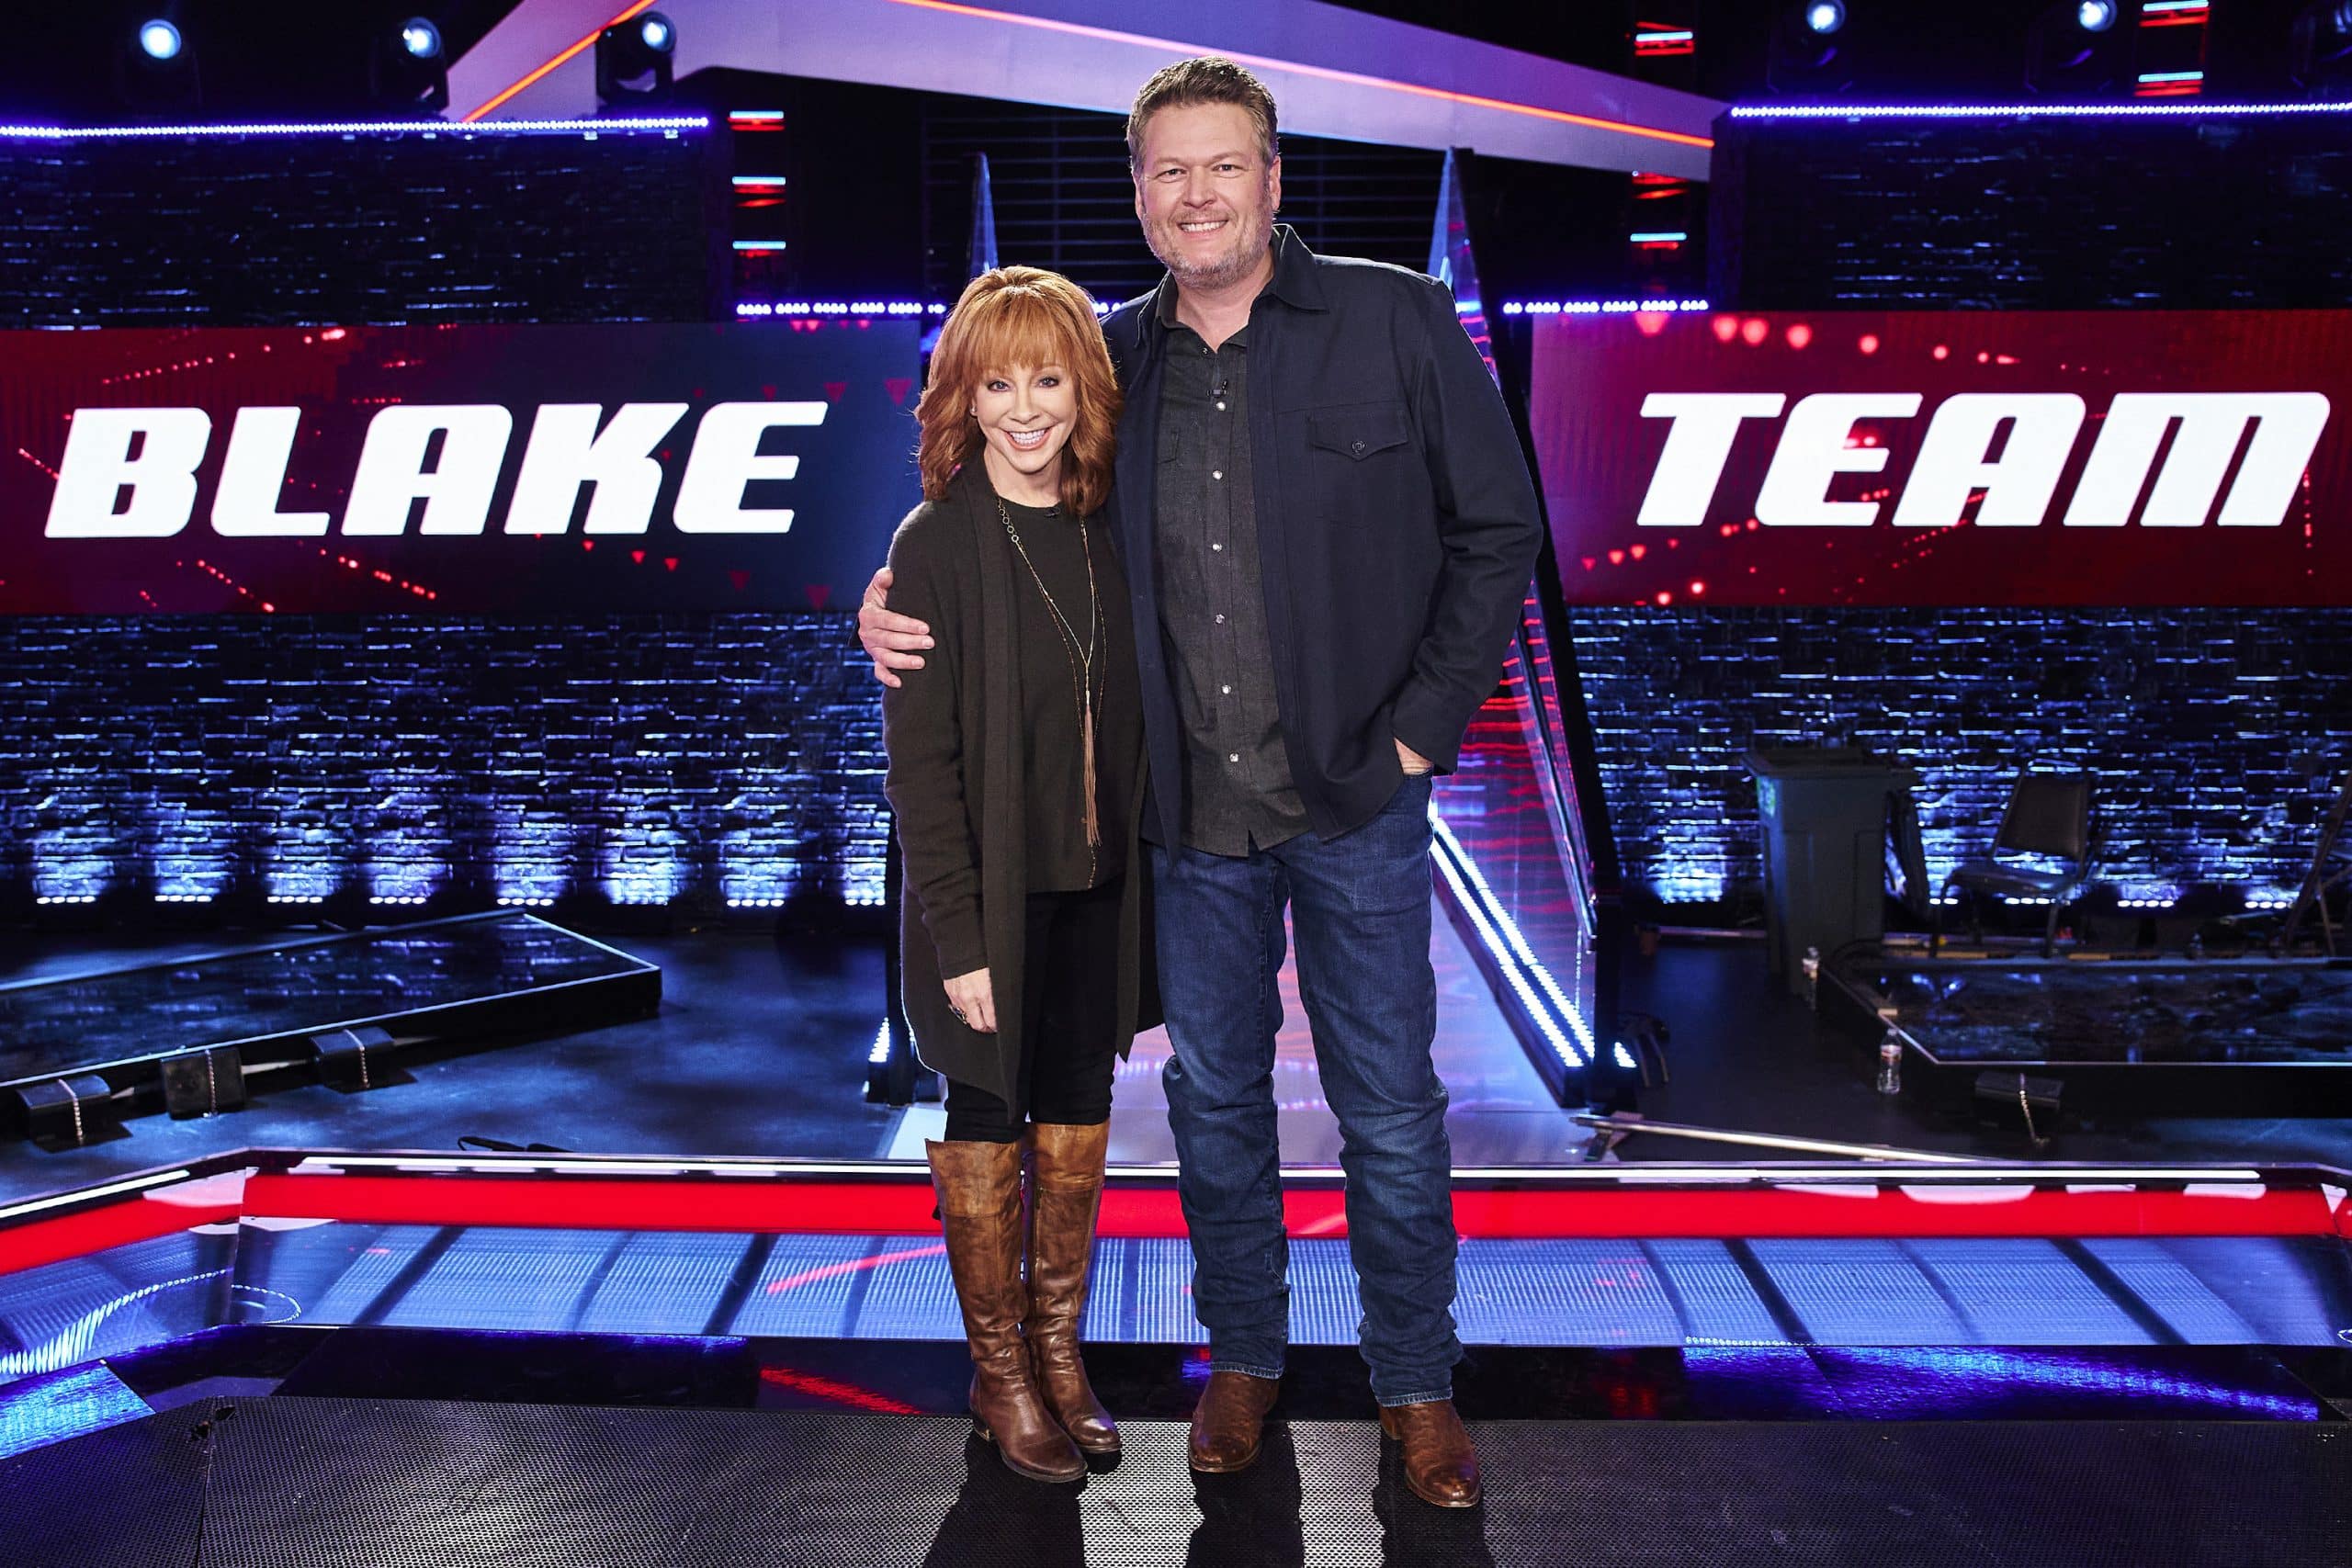 Reba McEntire and Blake Shelton on set of "The Voice"